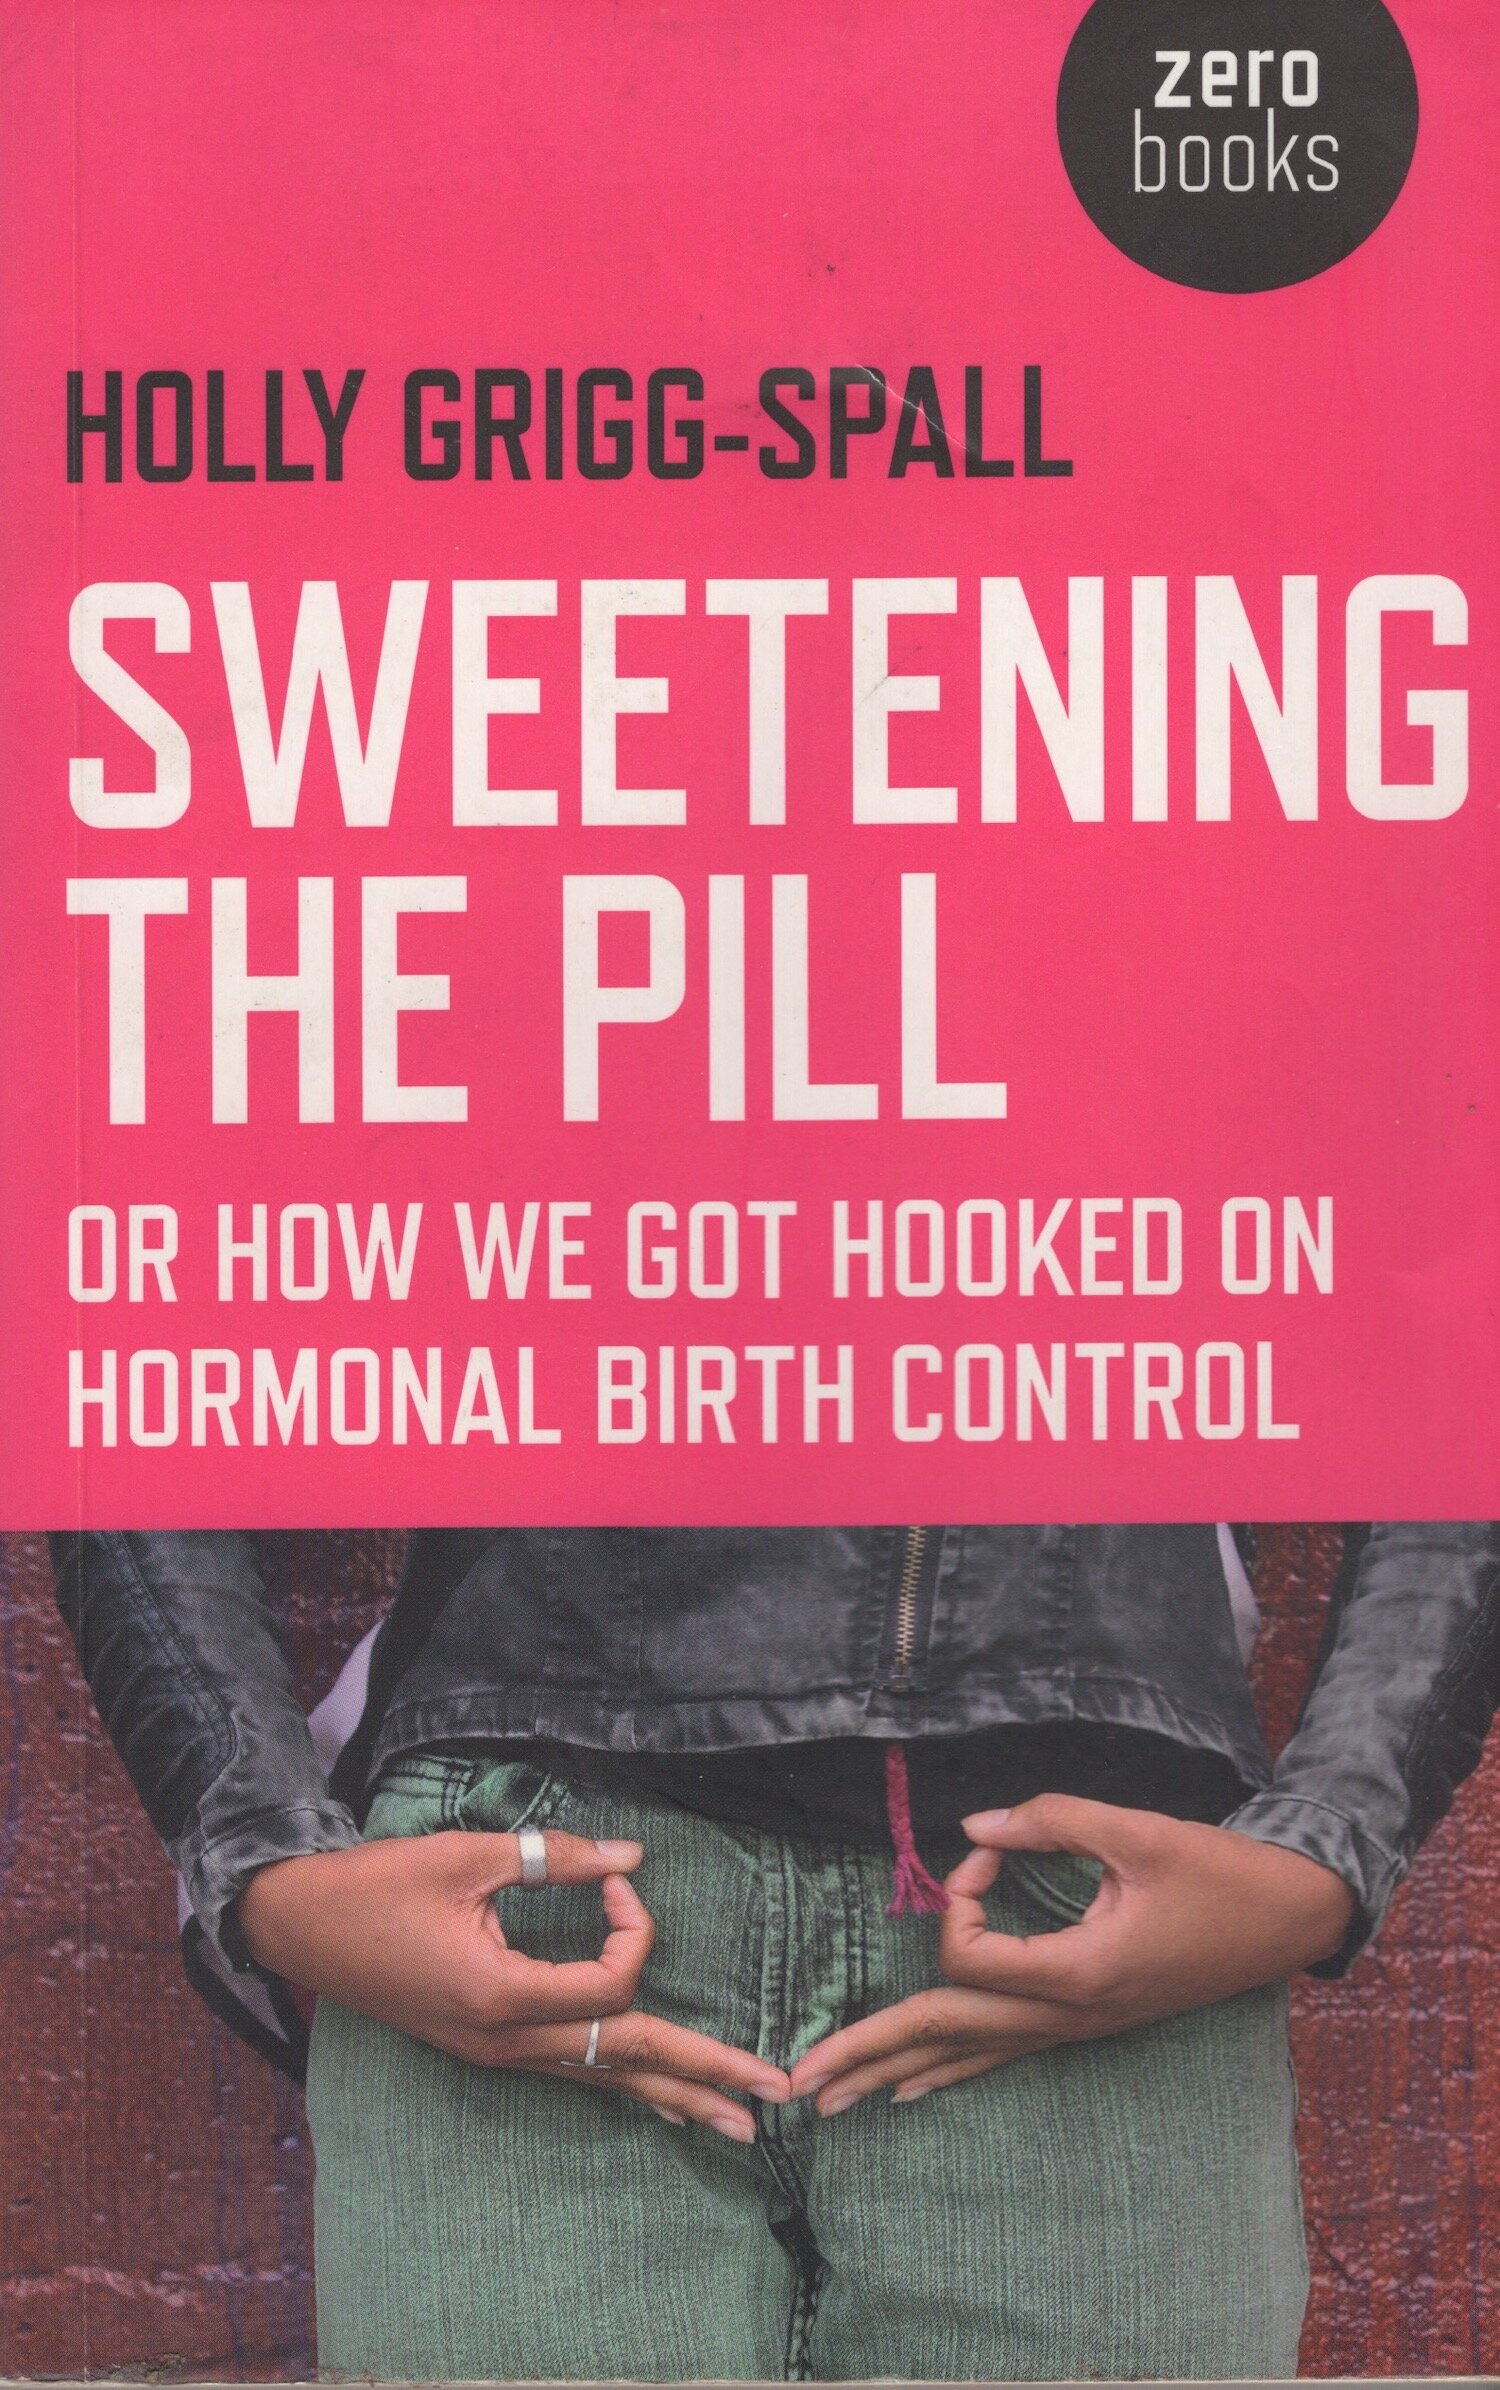 Sweetening the Pill by Holly Grigg-Spall - 2013